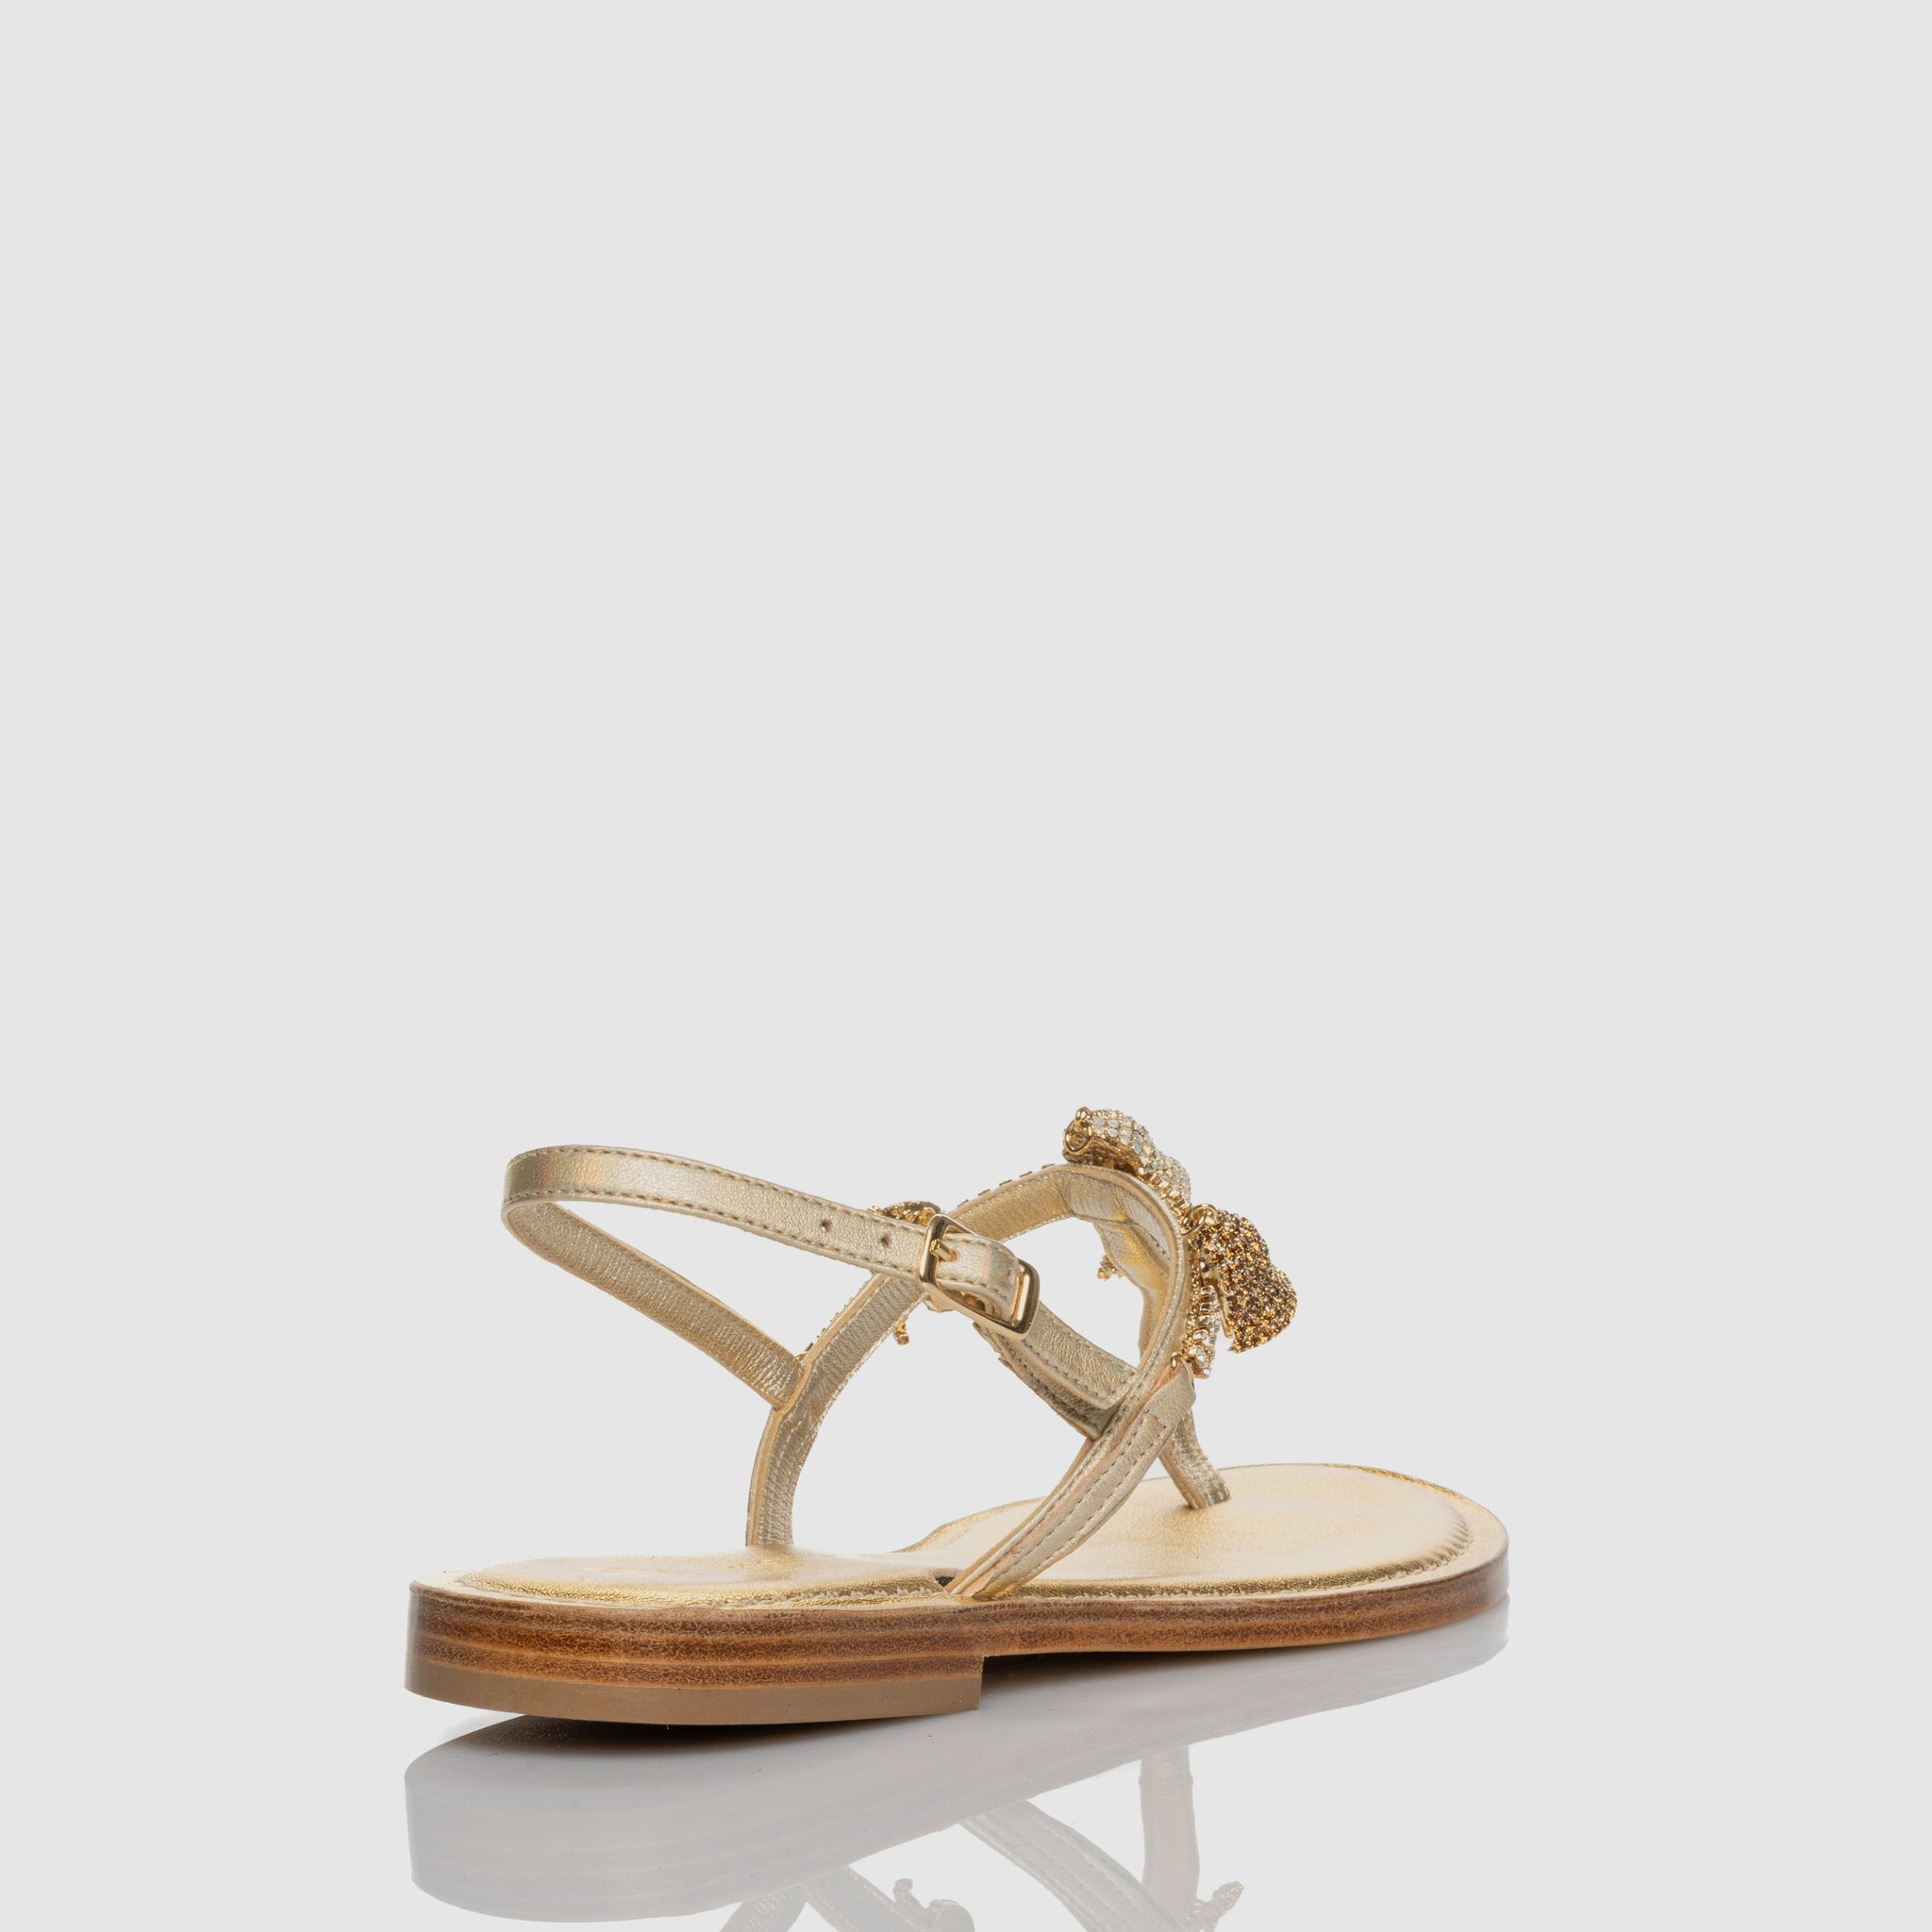 Capri Bells Gold thong sandal in Nappa leather with Capri bell charm